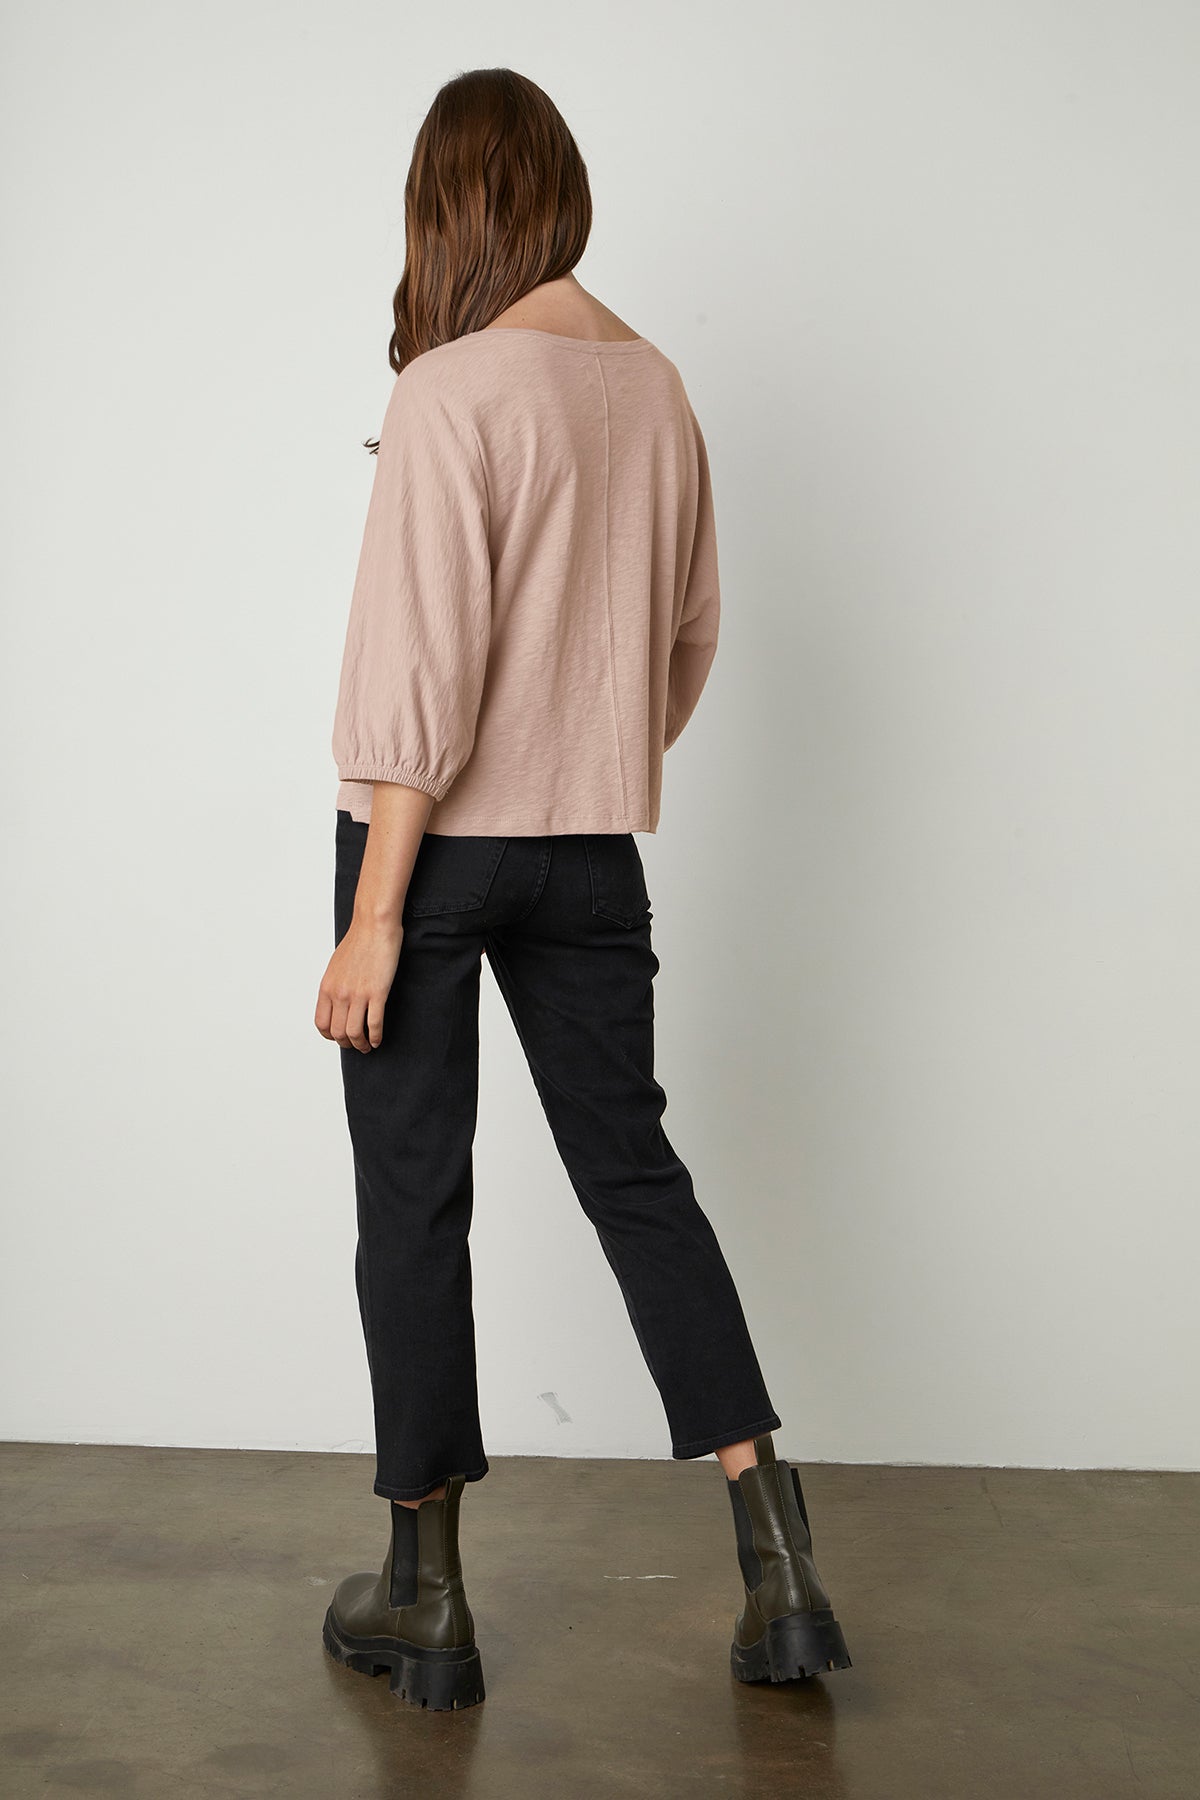   Corry Puff Sleeve Tee in rosegold with Victoria denim in noir black back 